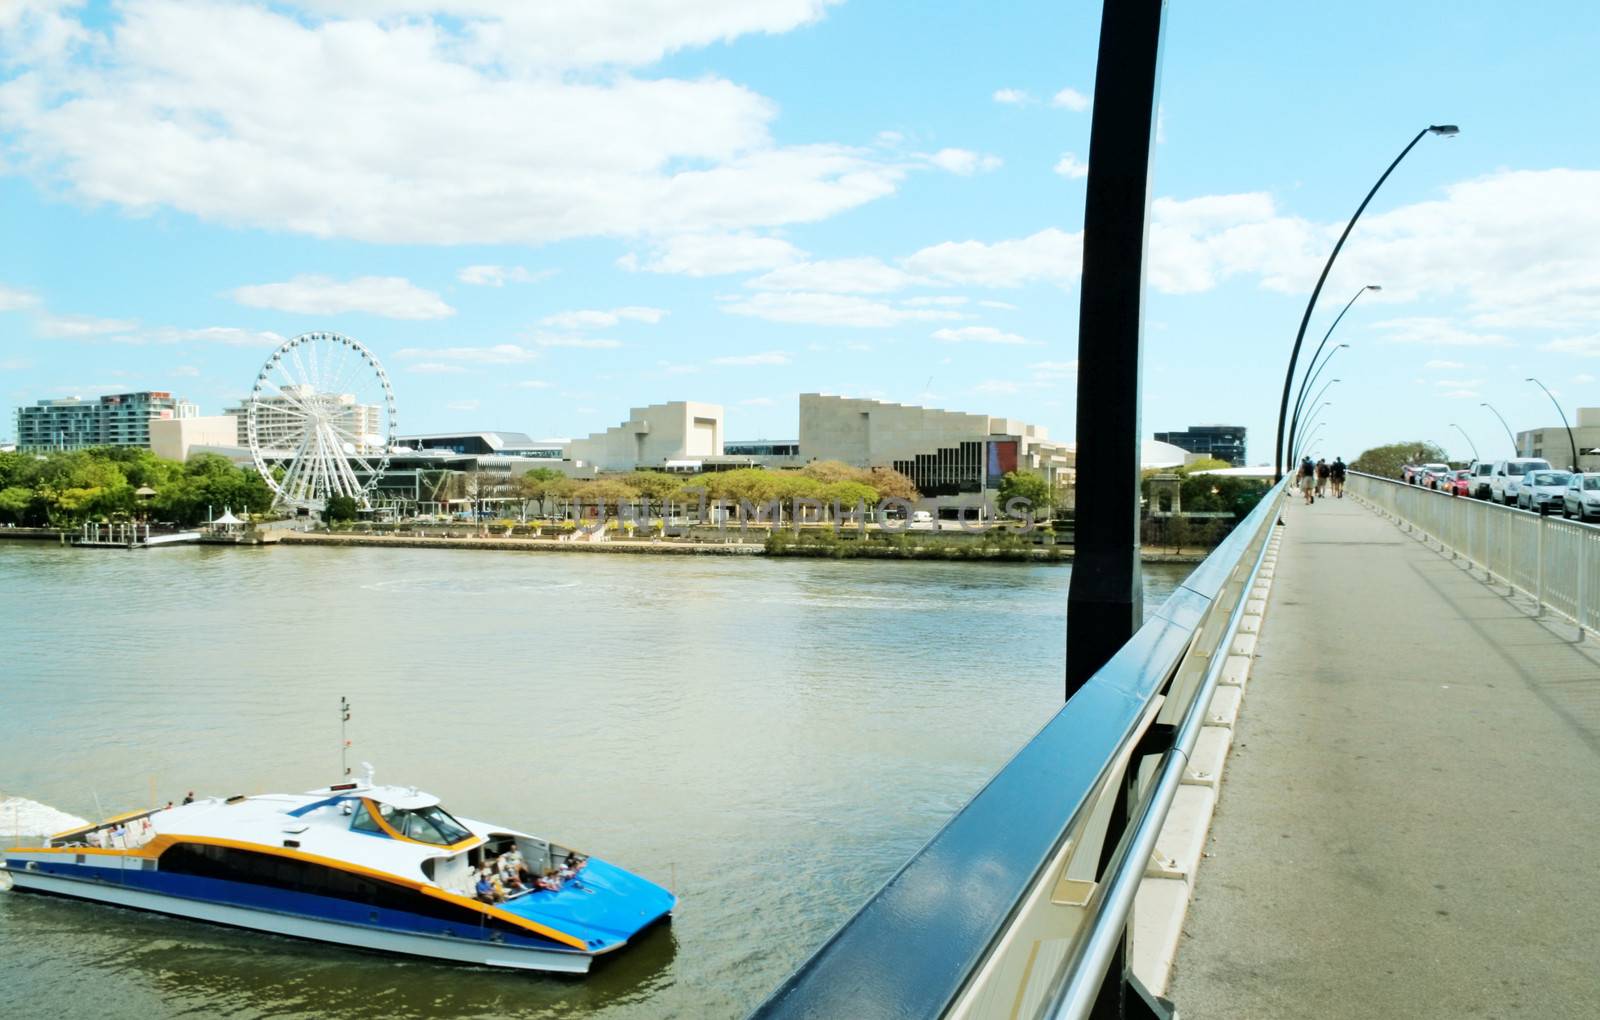 The view of Southbank from the Captain Cook Bridge in Brisbane Queensland Australia.